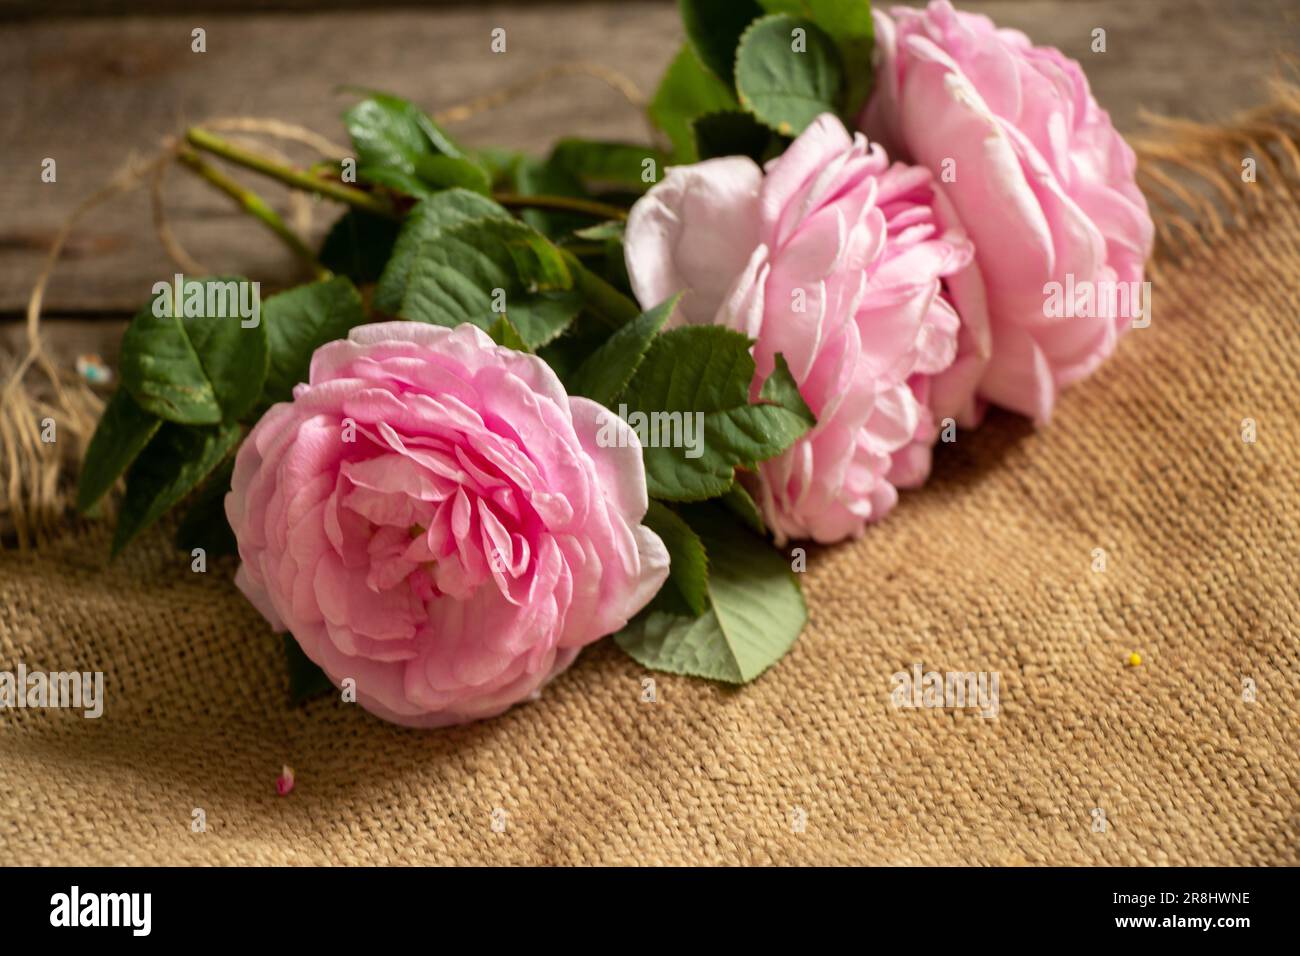 pink roses on a wooden old table on burlap, floral background, roses Stock Photo